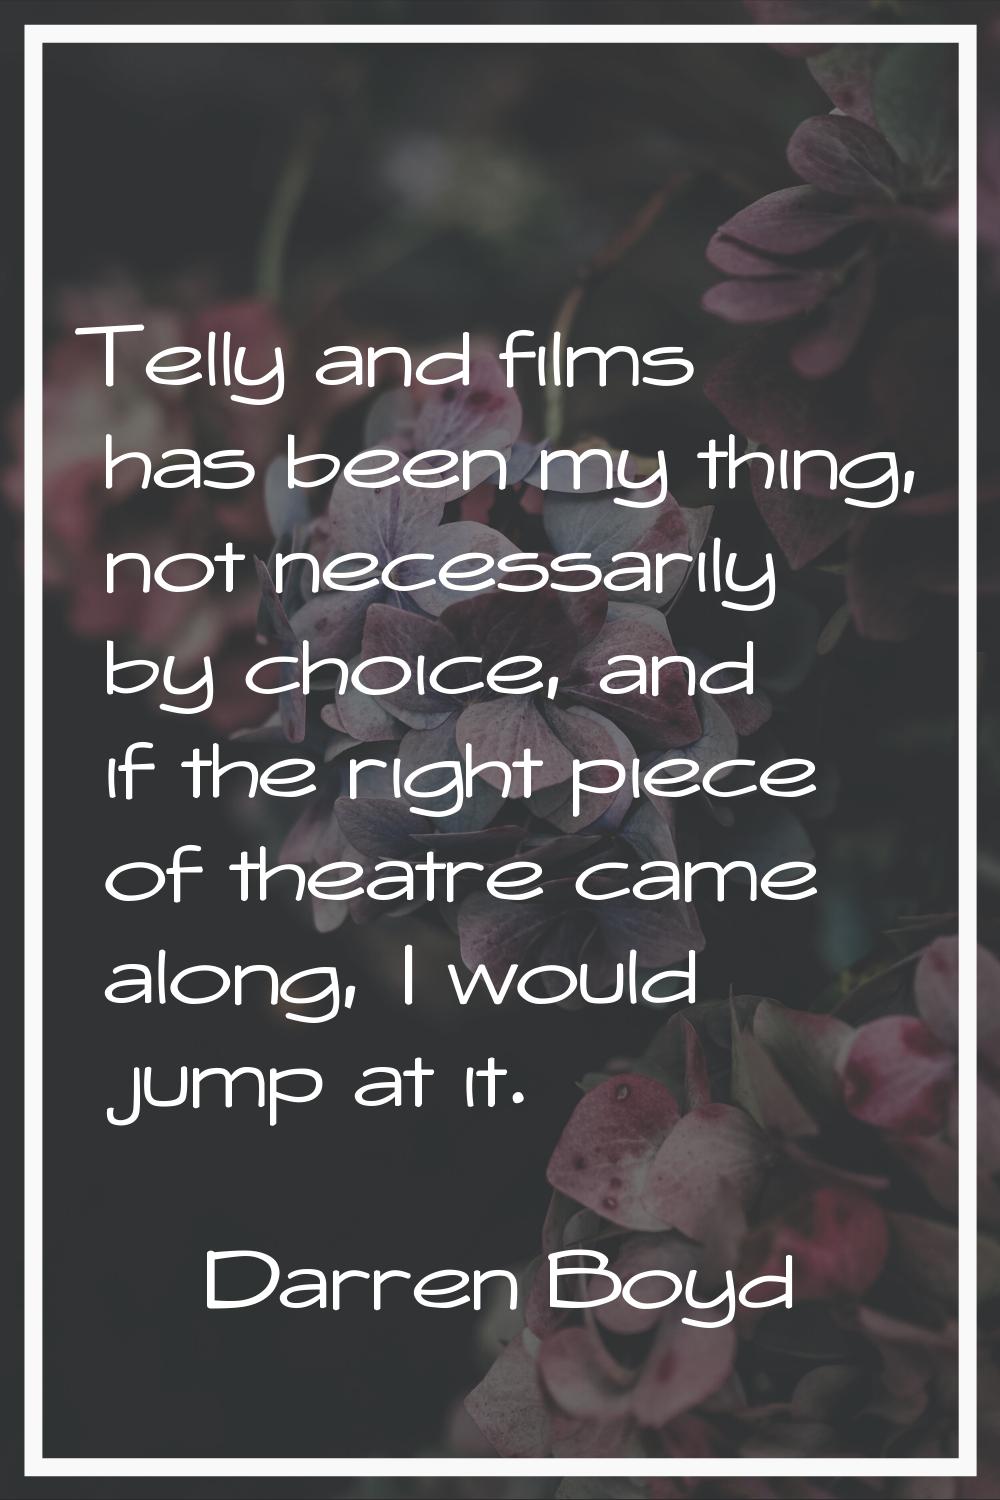 Telly and films has been my thing, not necessarily by choice, and if the right piece of theatre cam